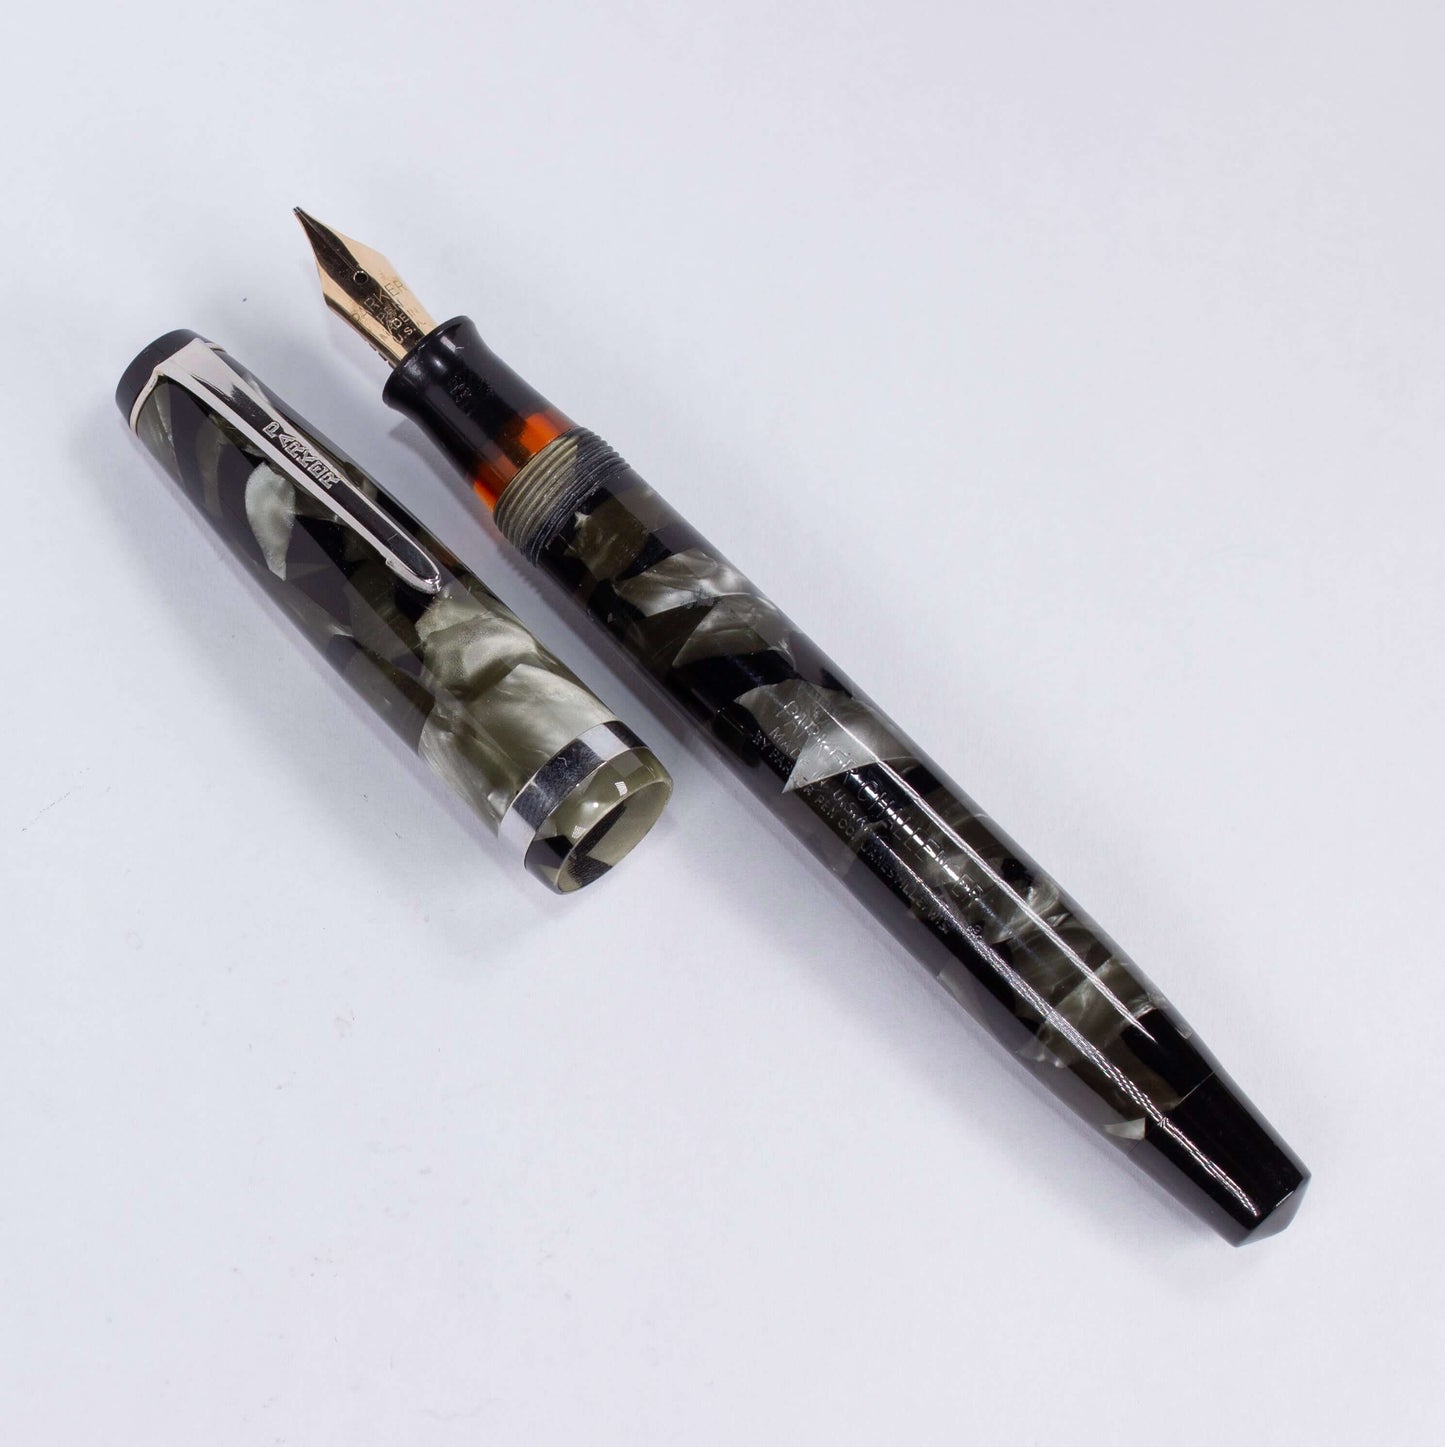 Parker Challenger Fountain Pen, Grey Marbled, Nickel Plated Clip and Cap Band, Button Filler, 14K Gold Nib Name/Type: Parker Challenger Restored Vintage Fountain Pen Manufacture Year: 1930s Length: 5 Filling System: Button Filler Color/Pattern: Grey Marbl